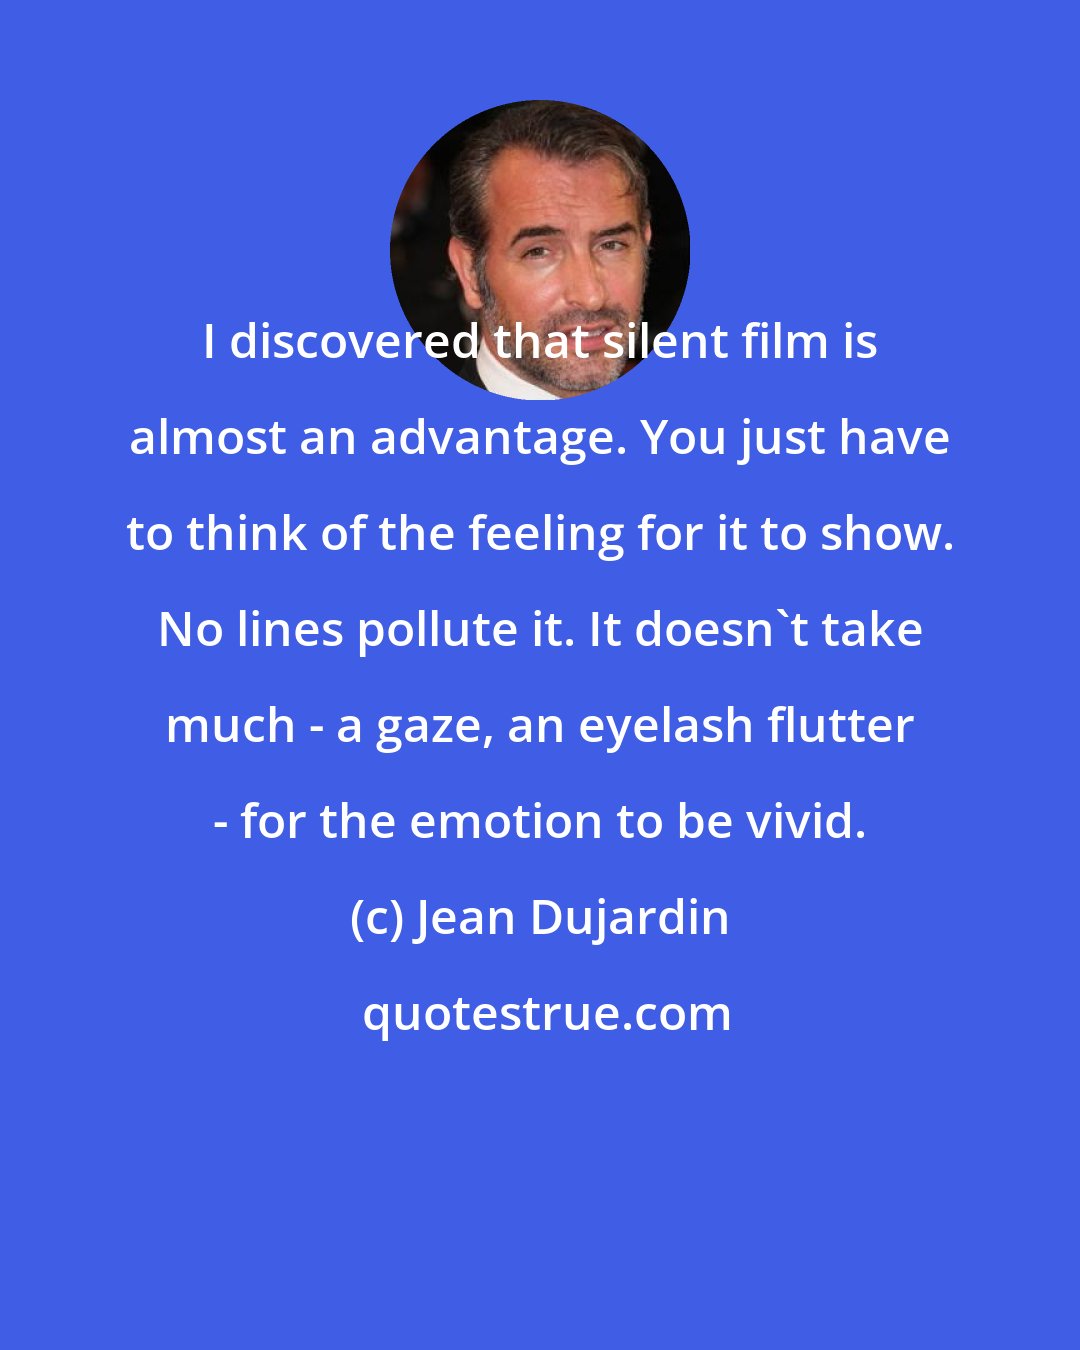 Jean Dujardin: I discovered that silent film is almost an advantage. You just have to think of the feeling for it to show. No lines pollute it. It doesn't take much - a gaze, an eyelash flutter - for the emotion to be vivid.